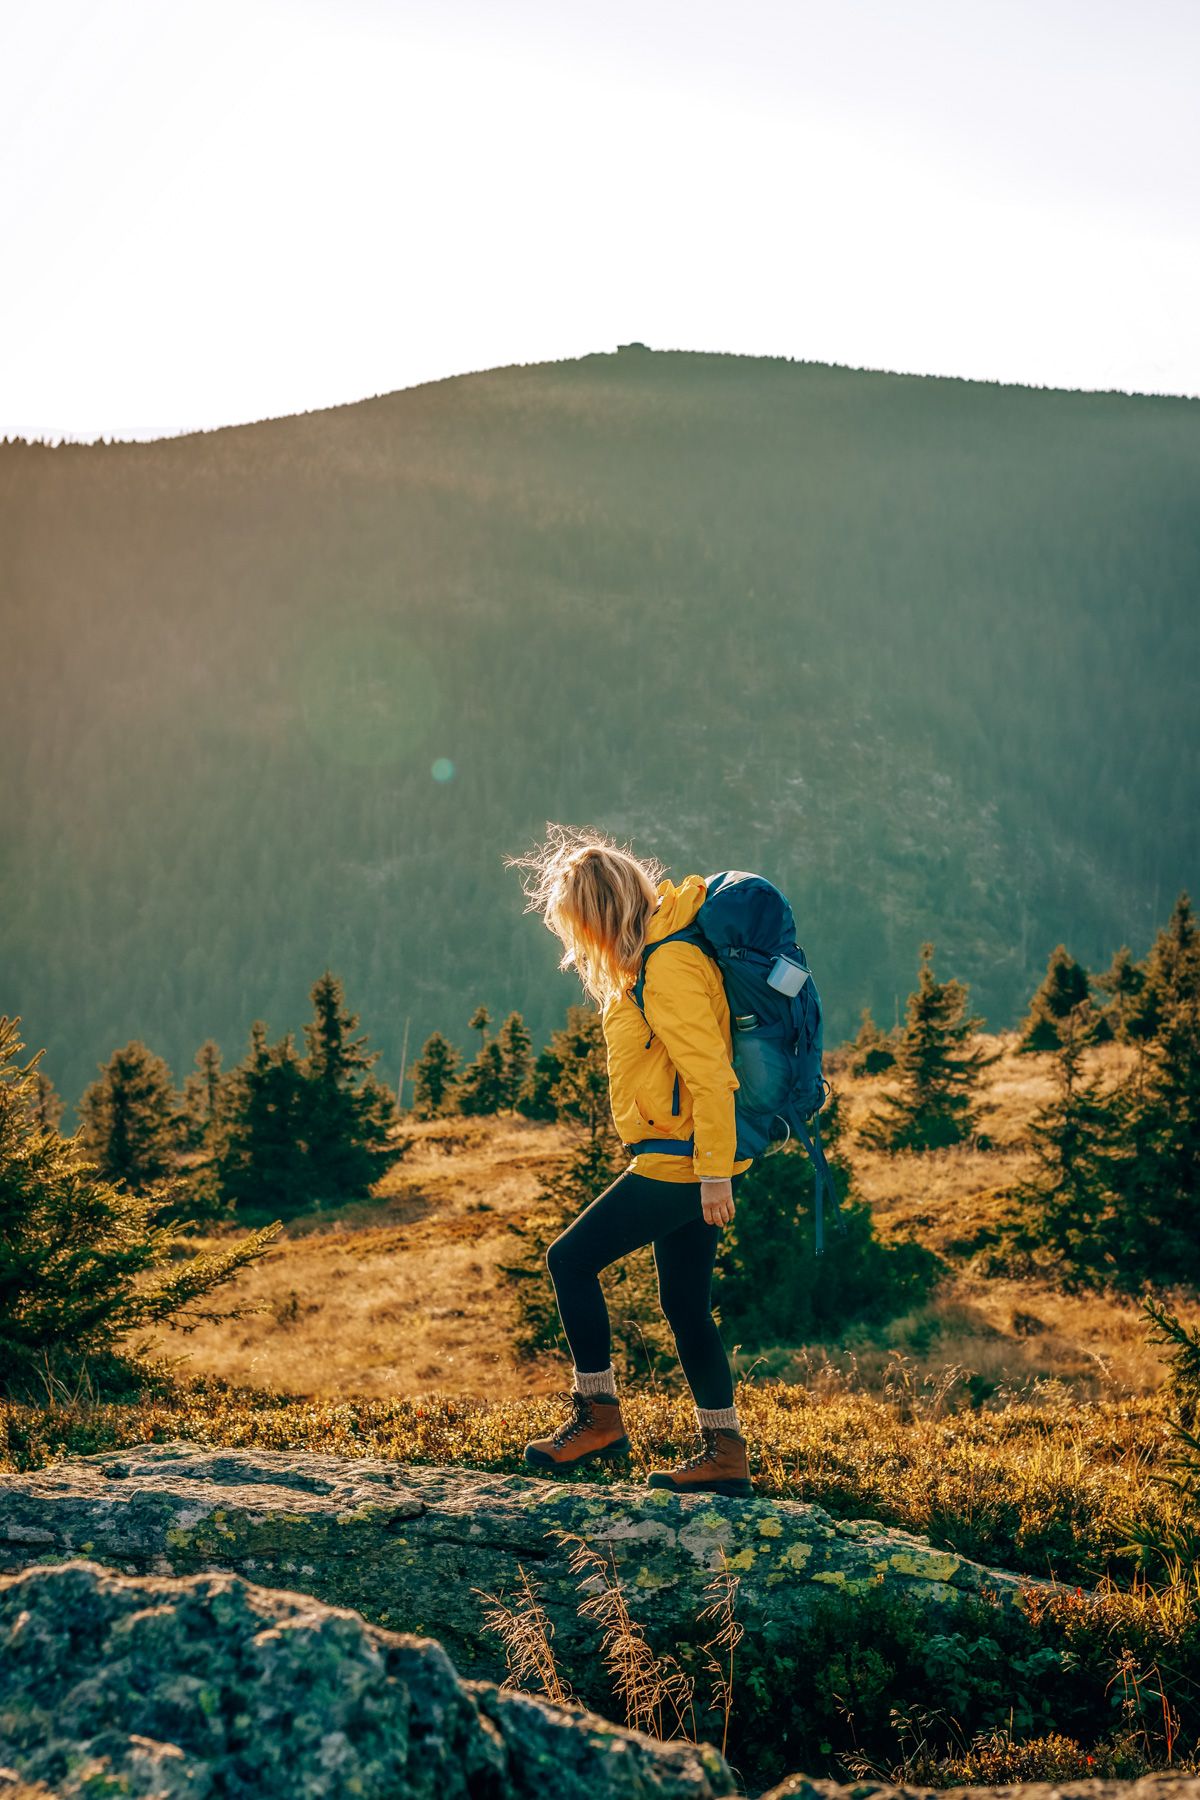 A blonde woman seen in profile wearing a yellow windbreaker, black leggings, and a blue backpack hiking over mountainous terrain in golden afternoon light.